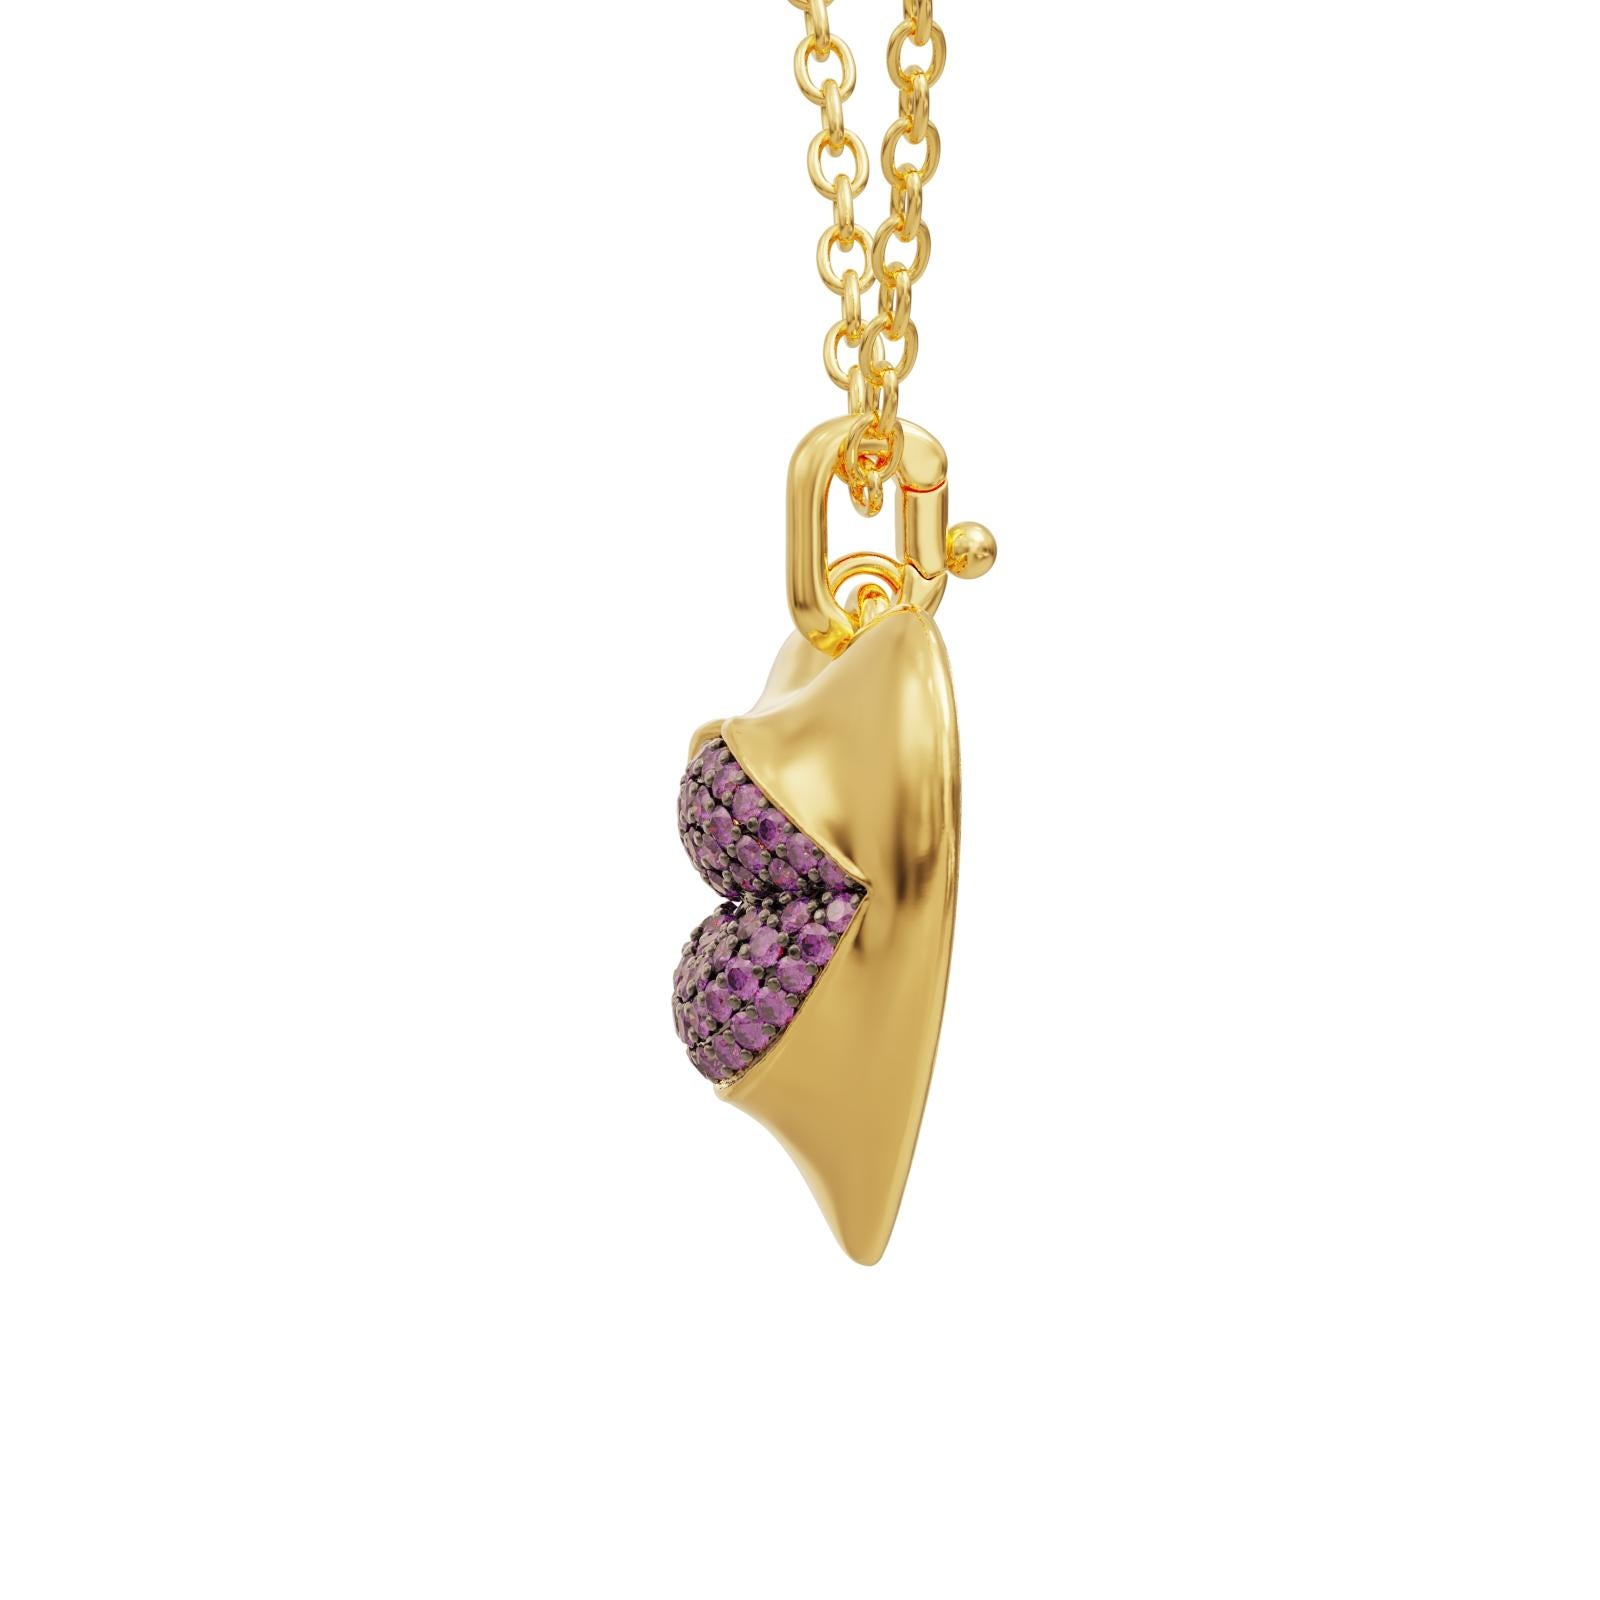 Introducing our stunning gold vermeil heart pendant necklace, a must-have for any fashion-forward woman looking to add a touch of elegance and sophistication to her jewelry collection. Crafted with the finest materials and adorned with a dazzling